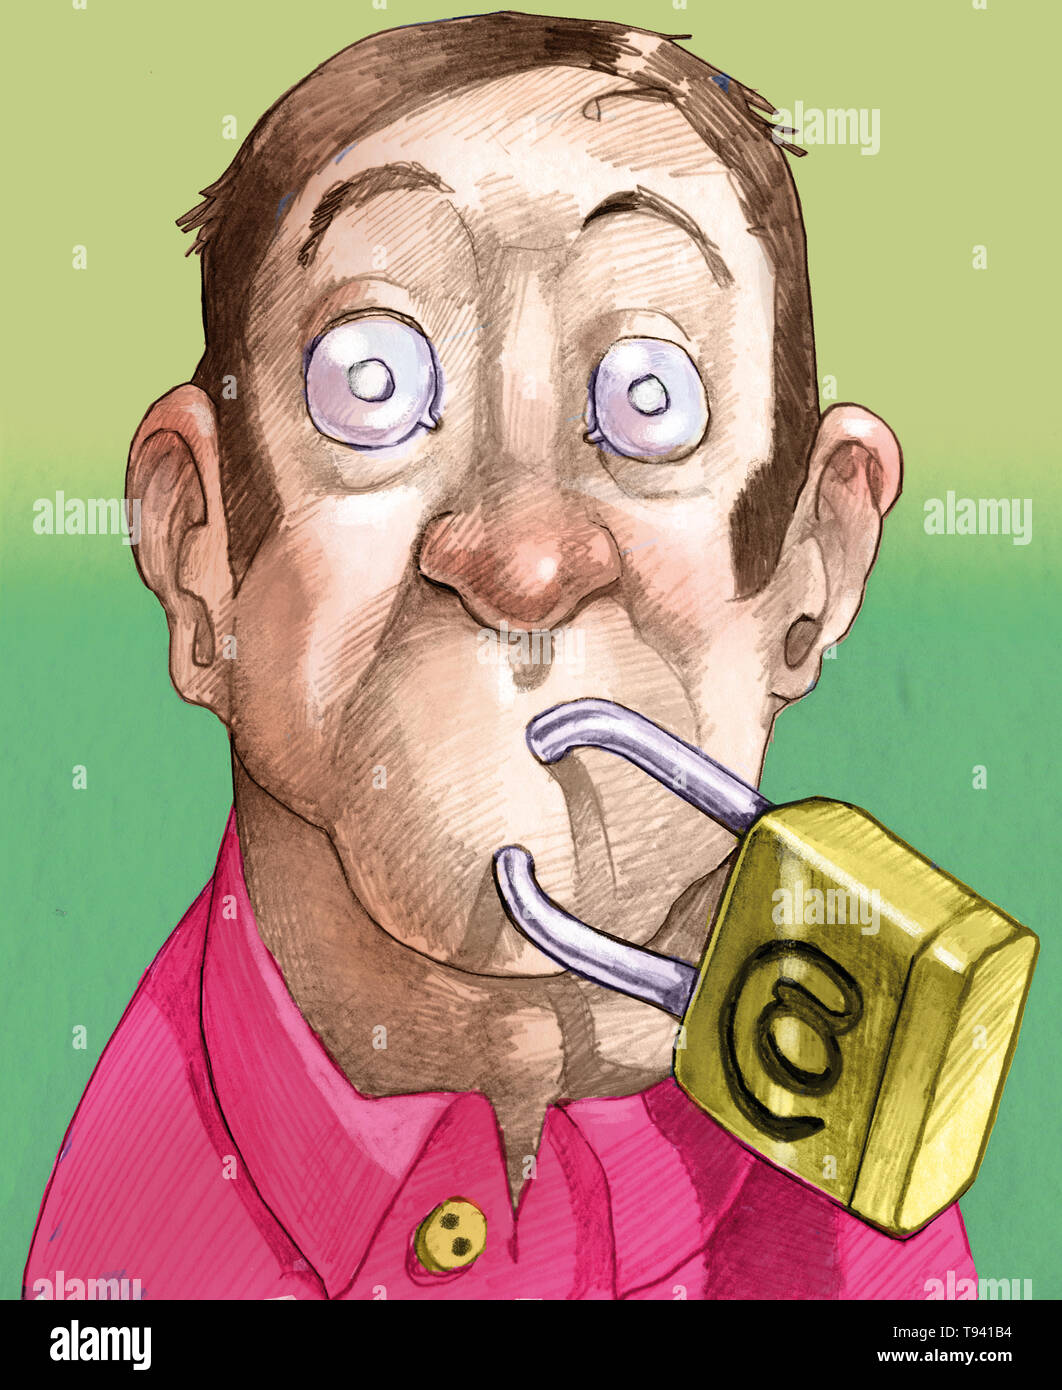 close-up of surprised and desperate looking man with padlock to close the mouth and censorship Stock Photo